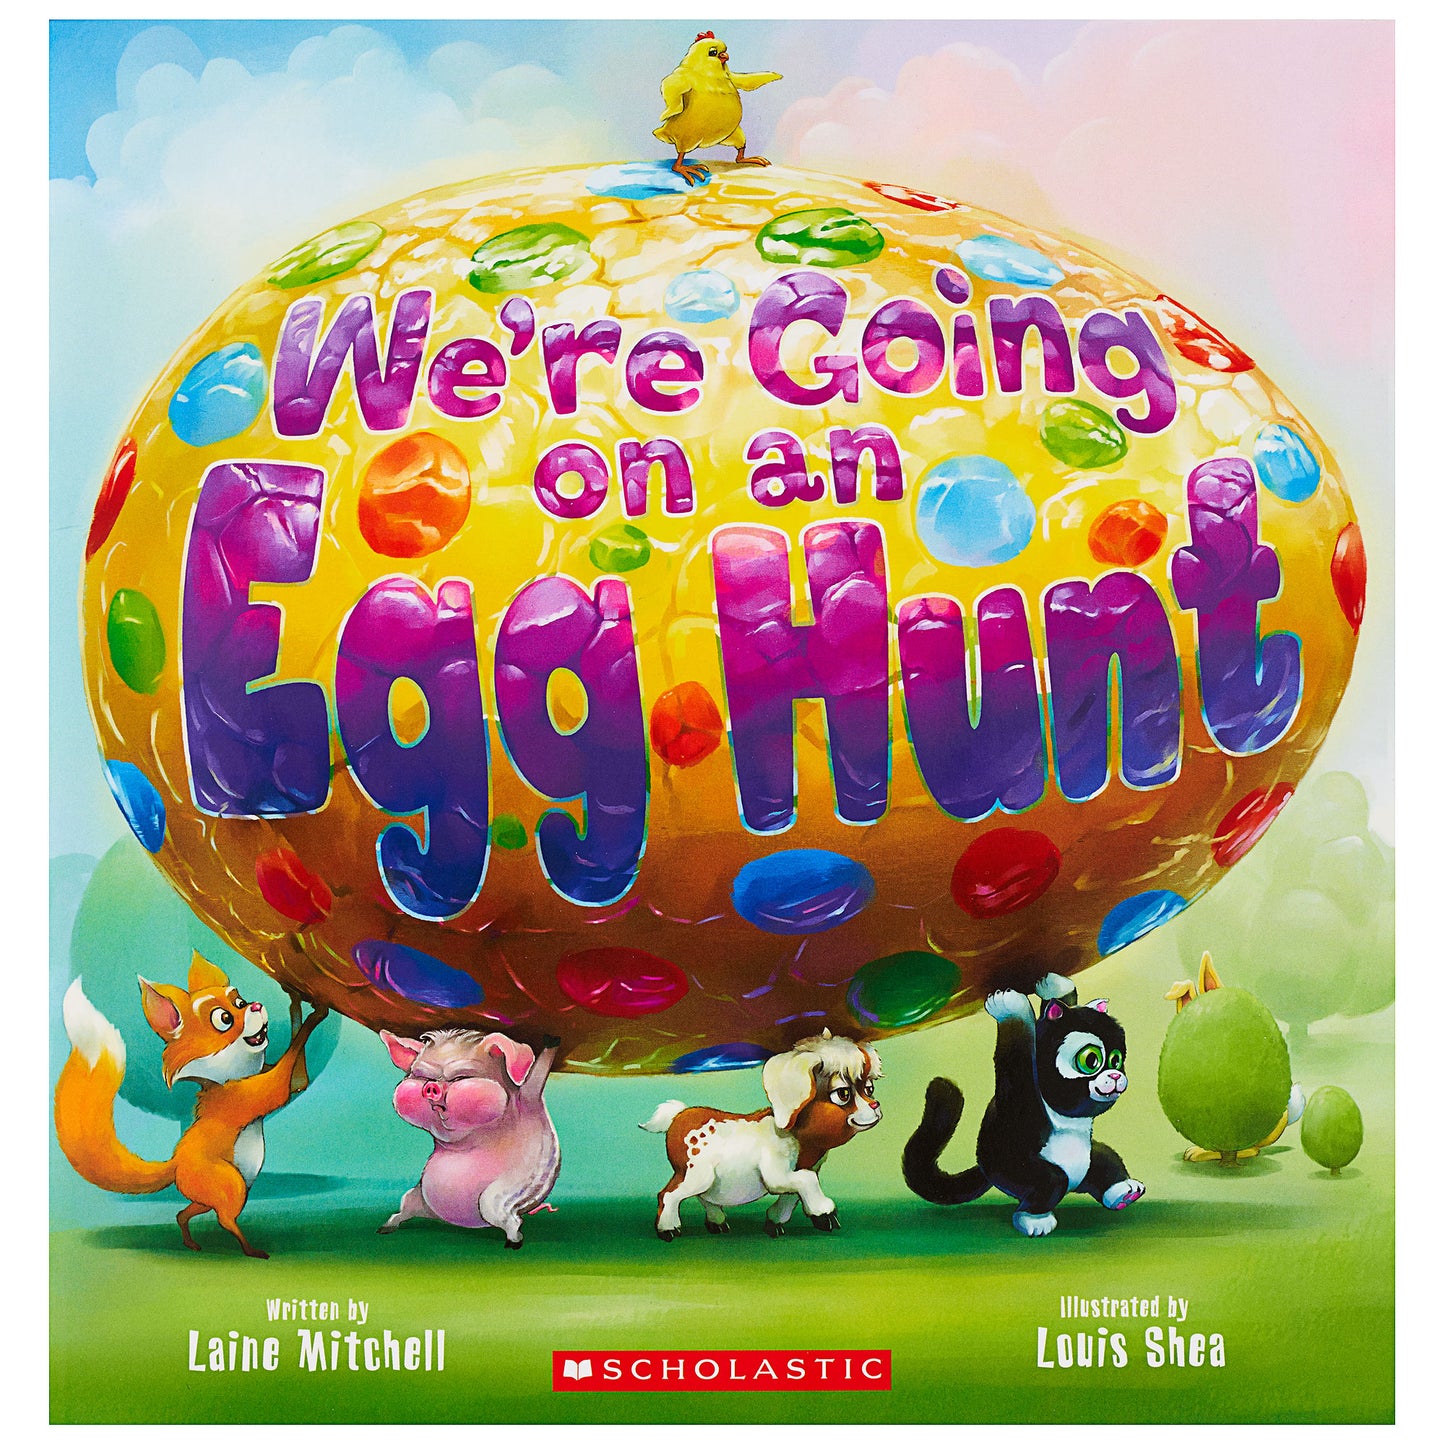 "We're Going On An Egg Hunt" Book